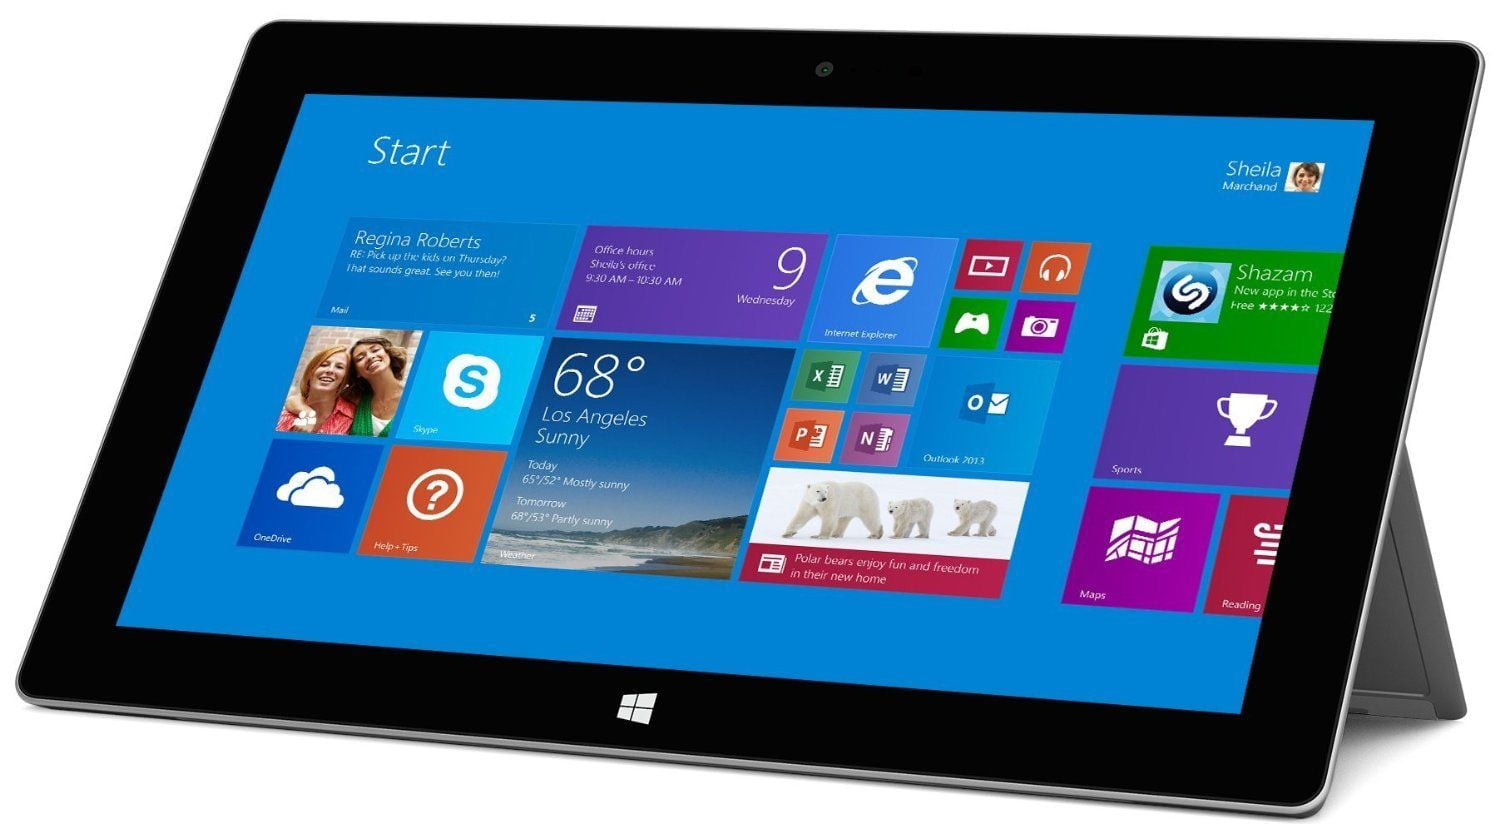 Microsoft Surface 2 Tablet, 10.6